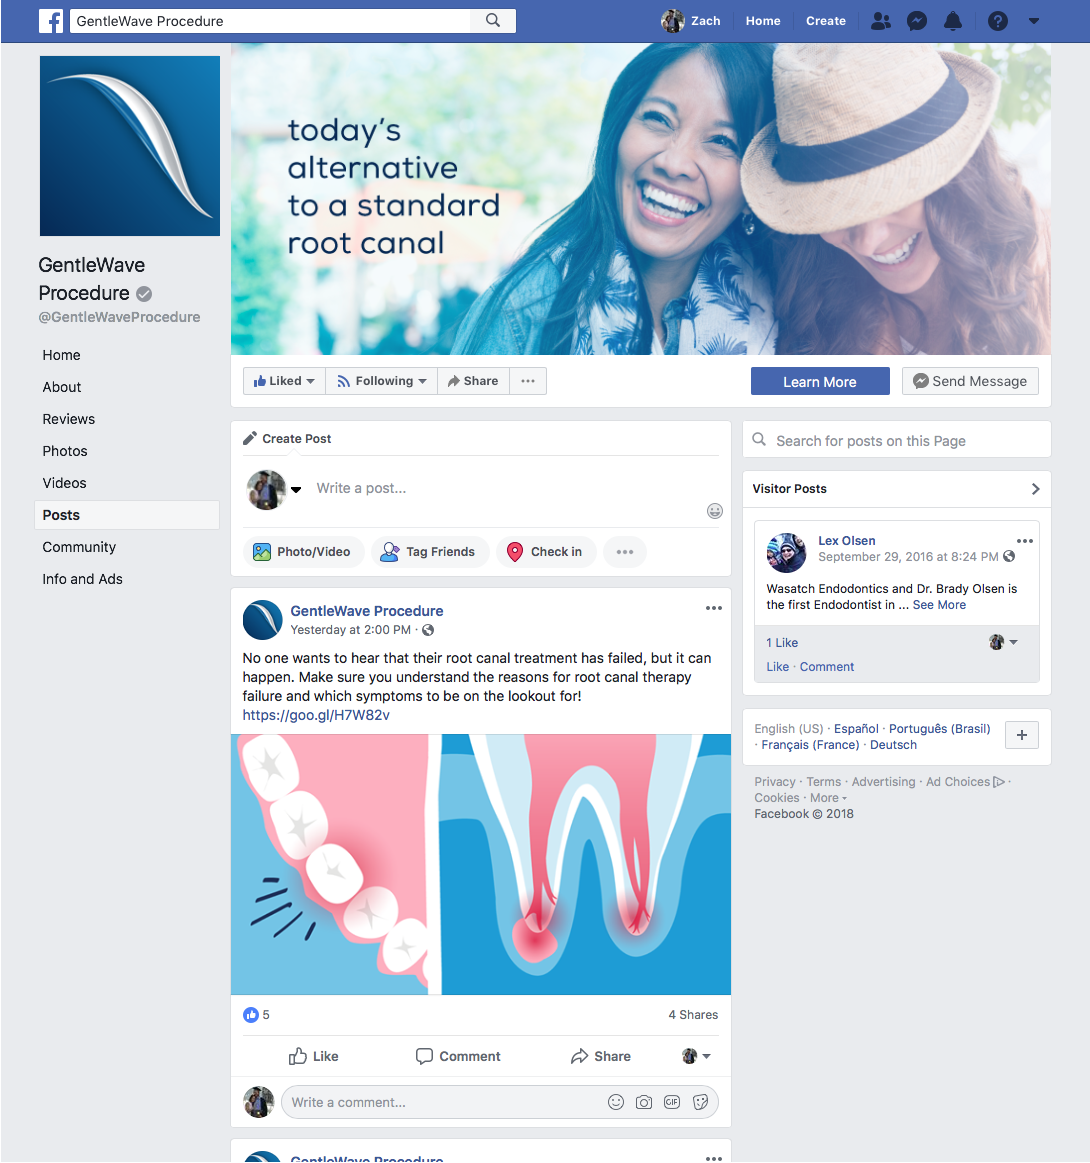 When developing content for the GentleWave® Procedure's Facebook Page, we ensure that the post imagery maintains a consistent look and feel.